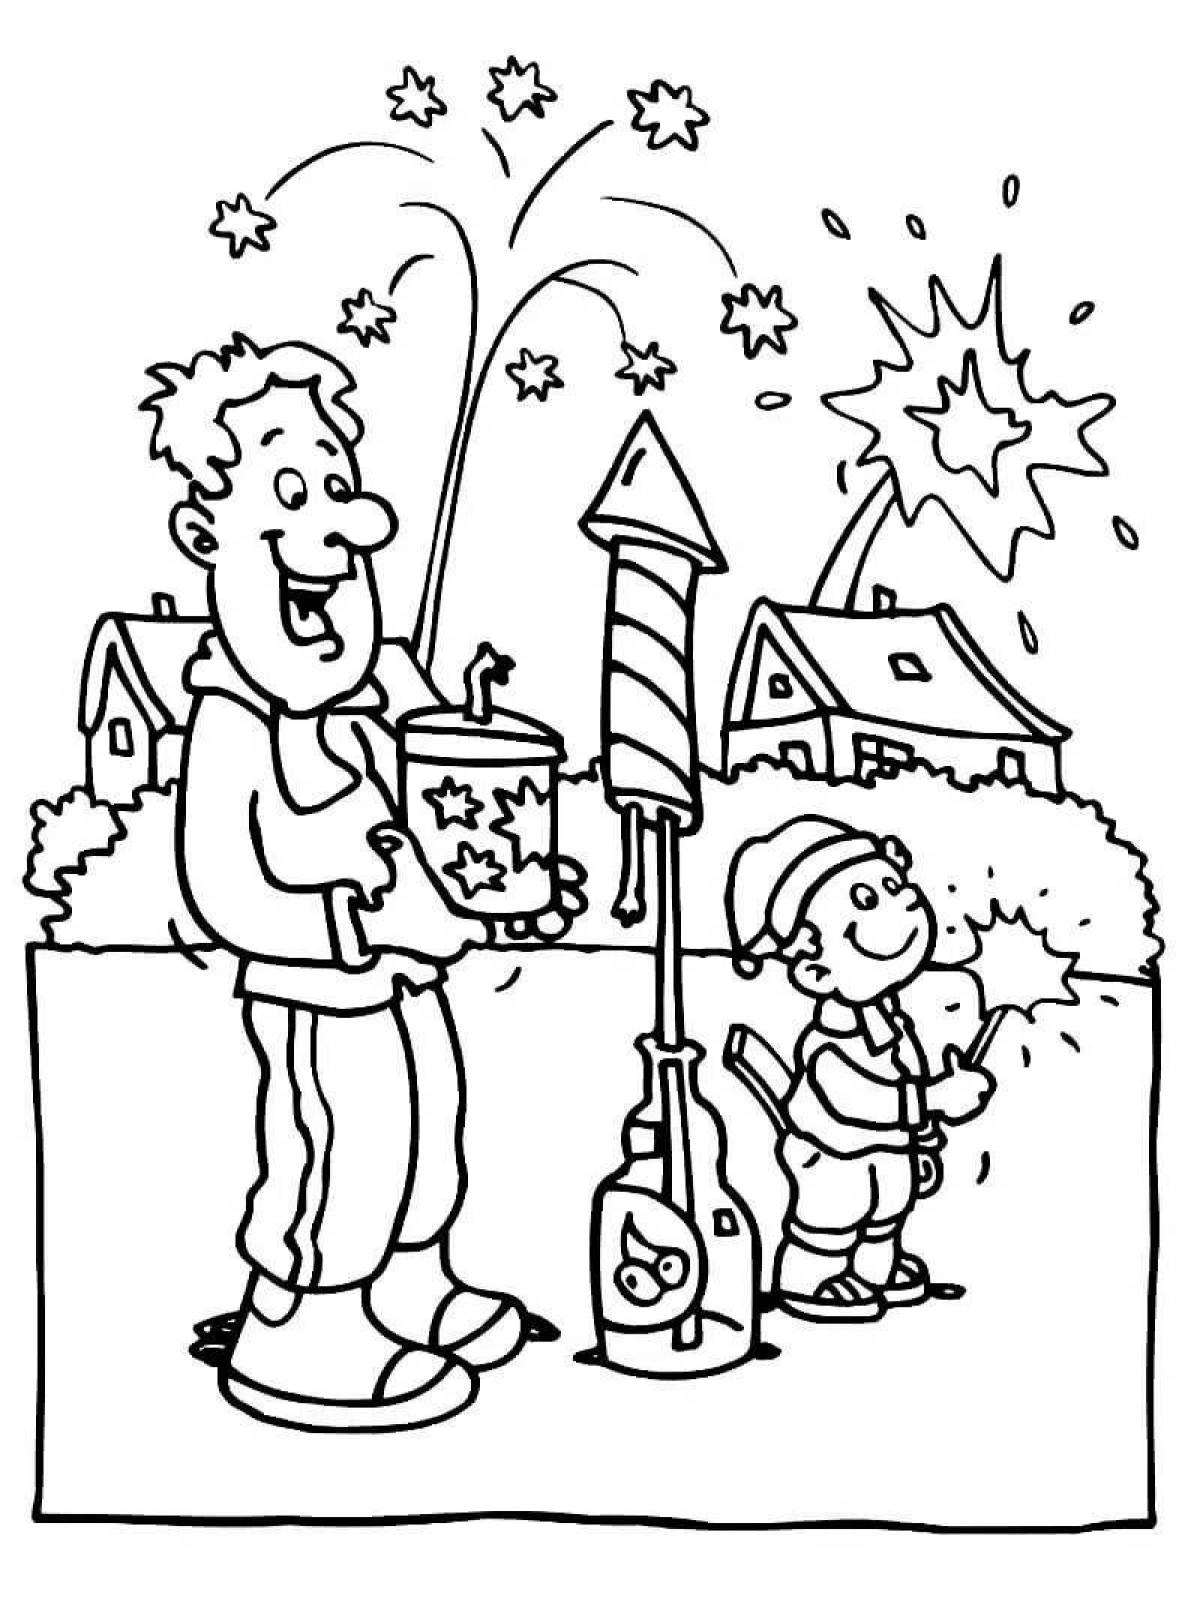 Joyful safe new year coloring pages